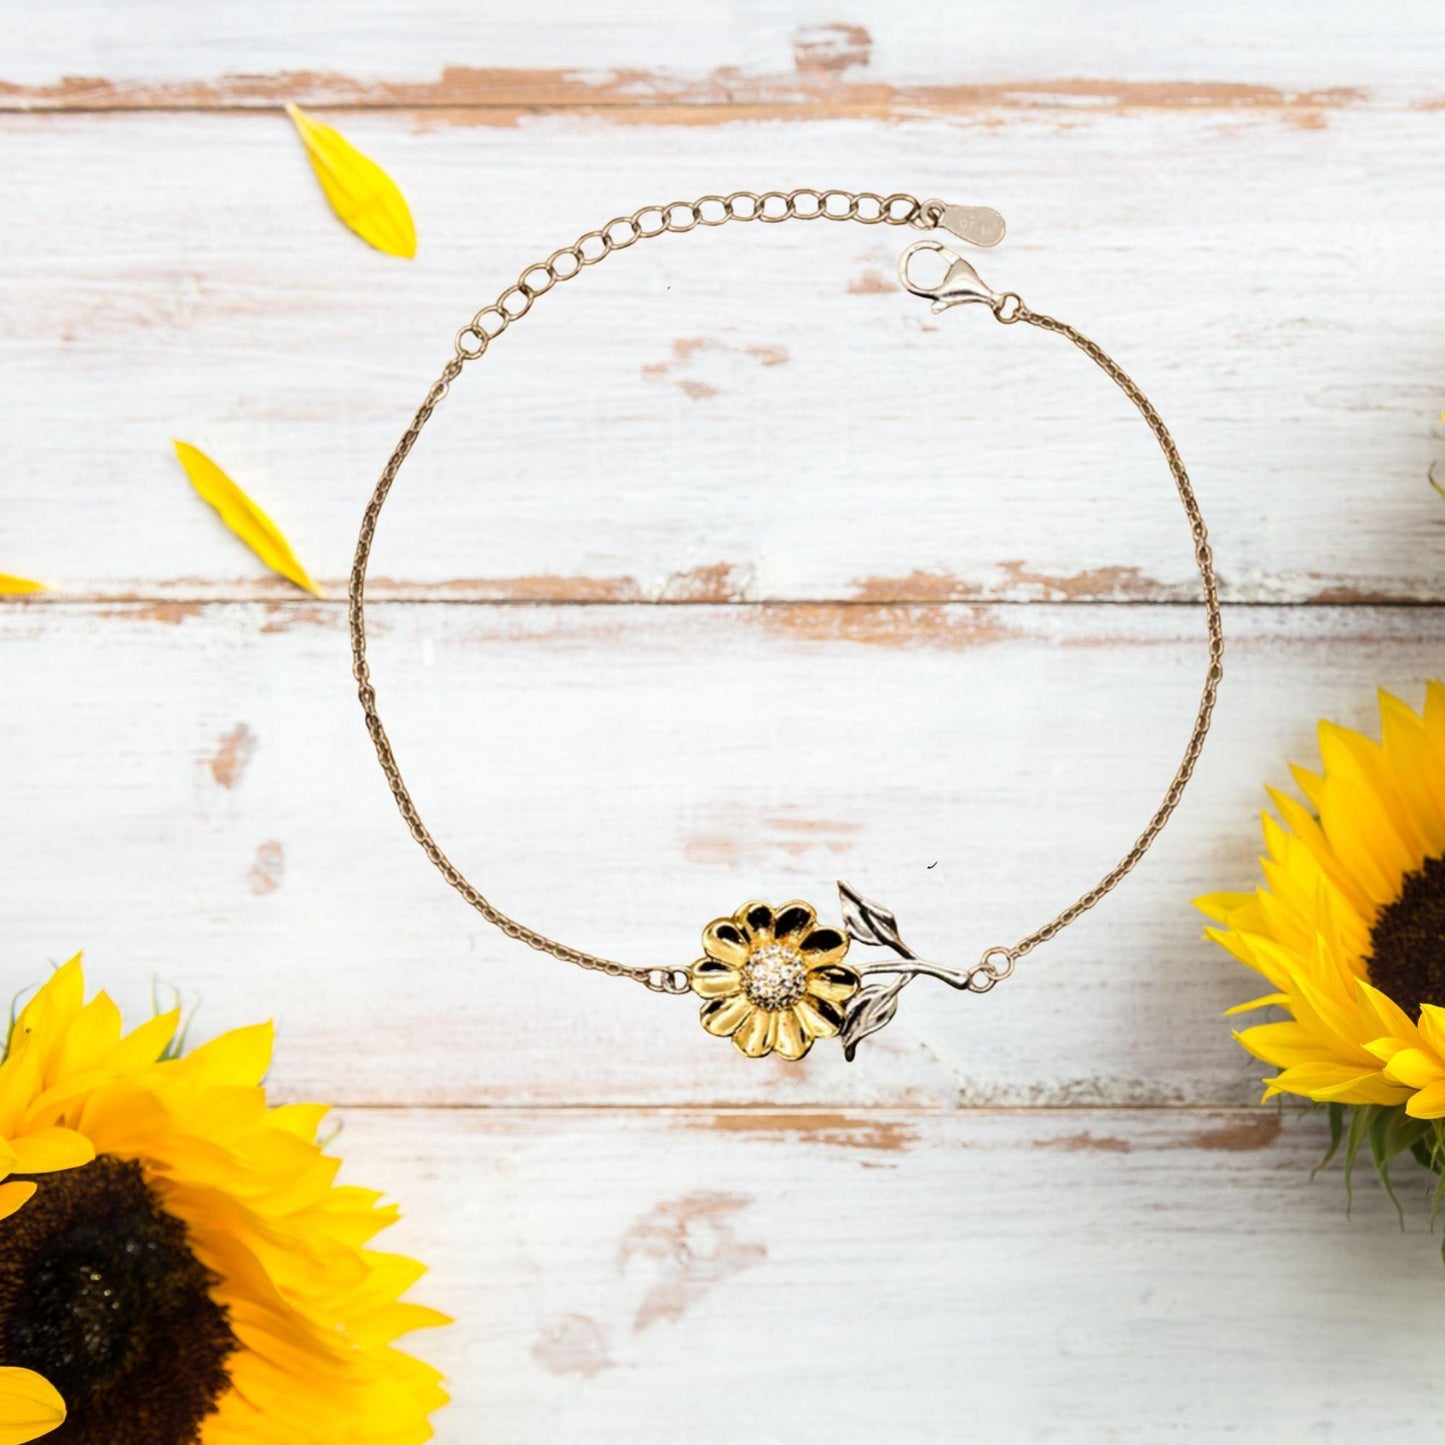 Wyoming is my home Gifts, Lovely Wyoming Birthday Christmas Sunflower Bracelet For People from Wyoming, Men, Women, Friends - Mallard Moon Gift Shop